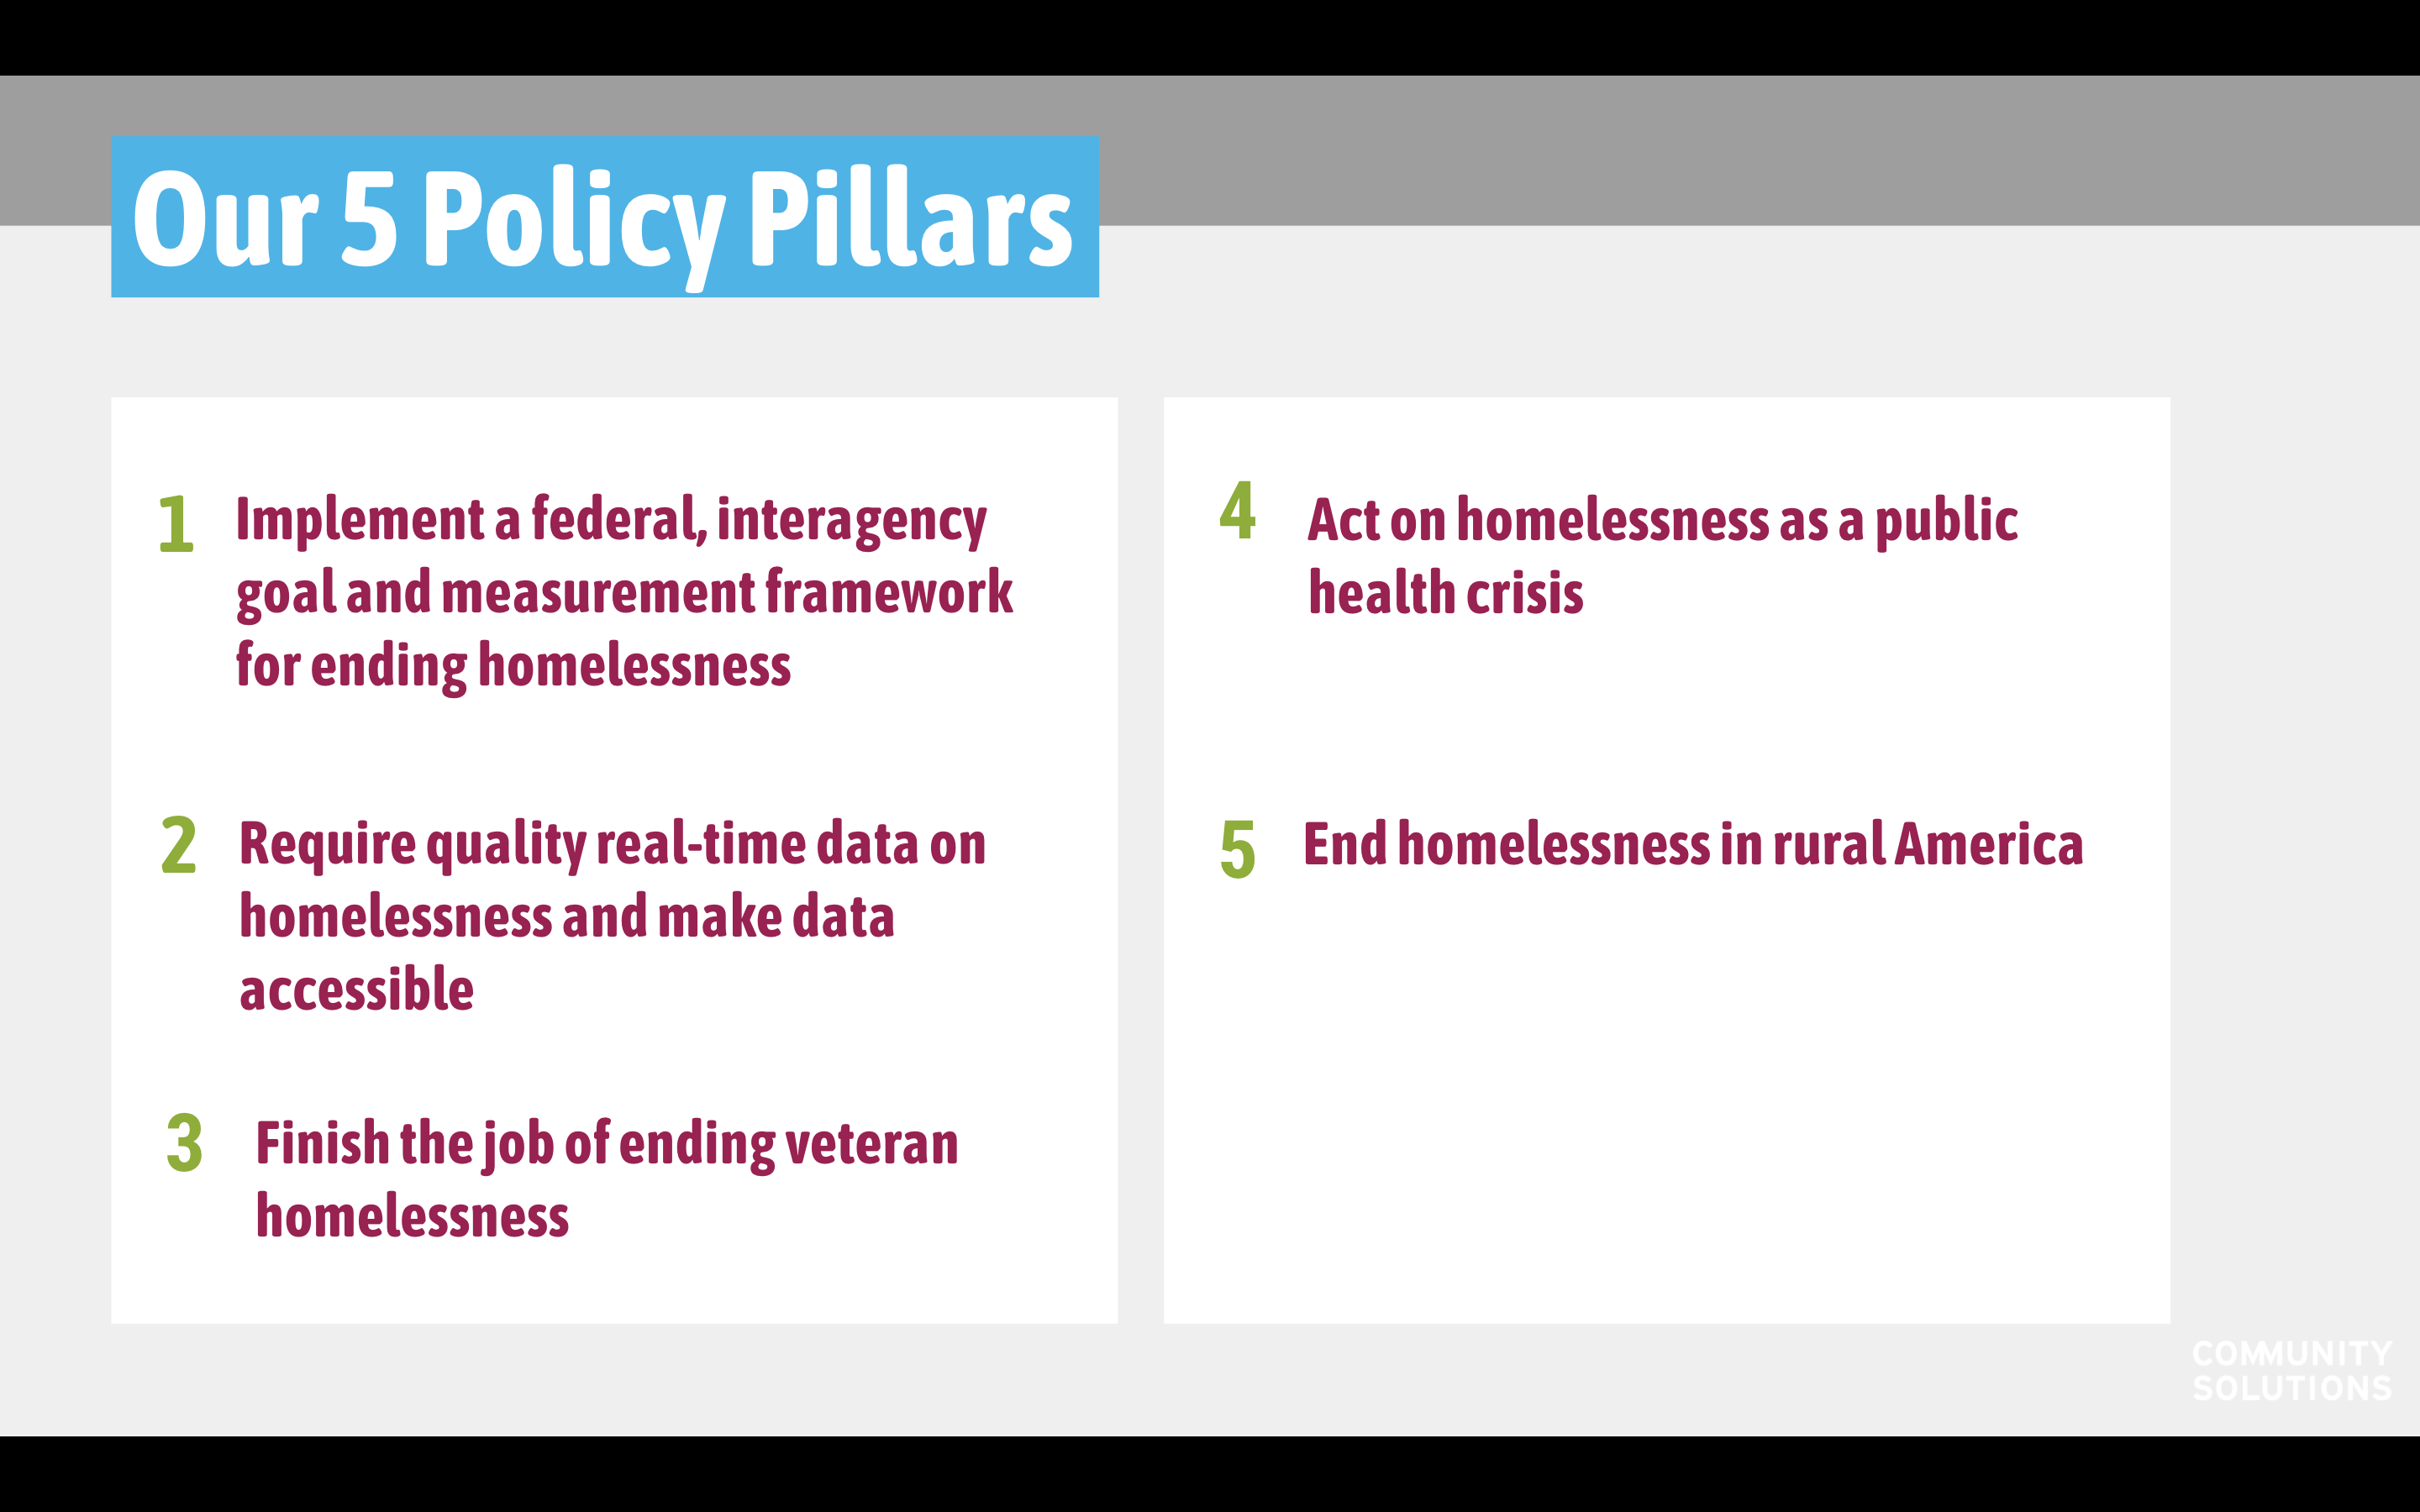 Implement a federal, interagency goal and measurement framework for ending homelessness Require quality real-time data on homelessness and make data accessible Finish the job of ending veteran homelessness Act on homelessness as a public health crisis End homelessness in rural America